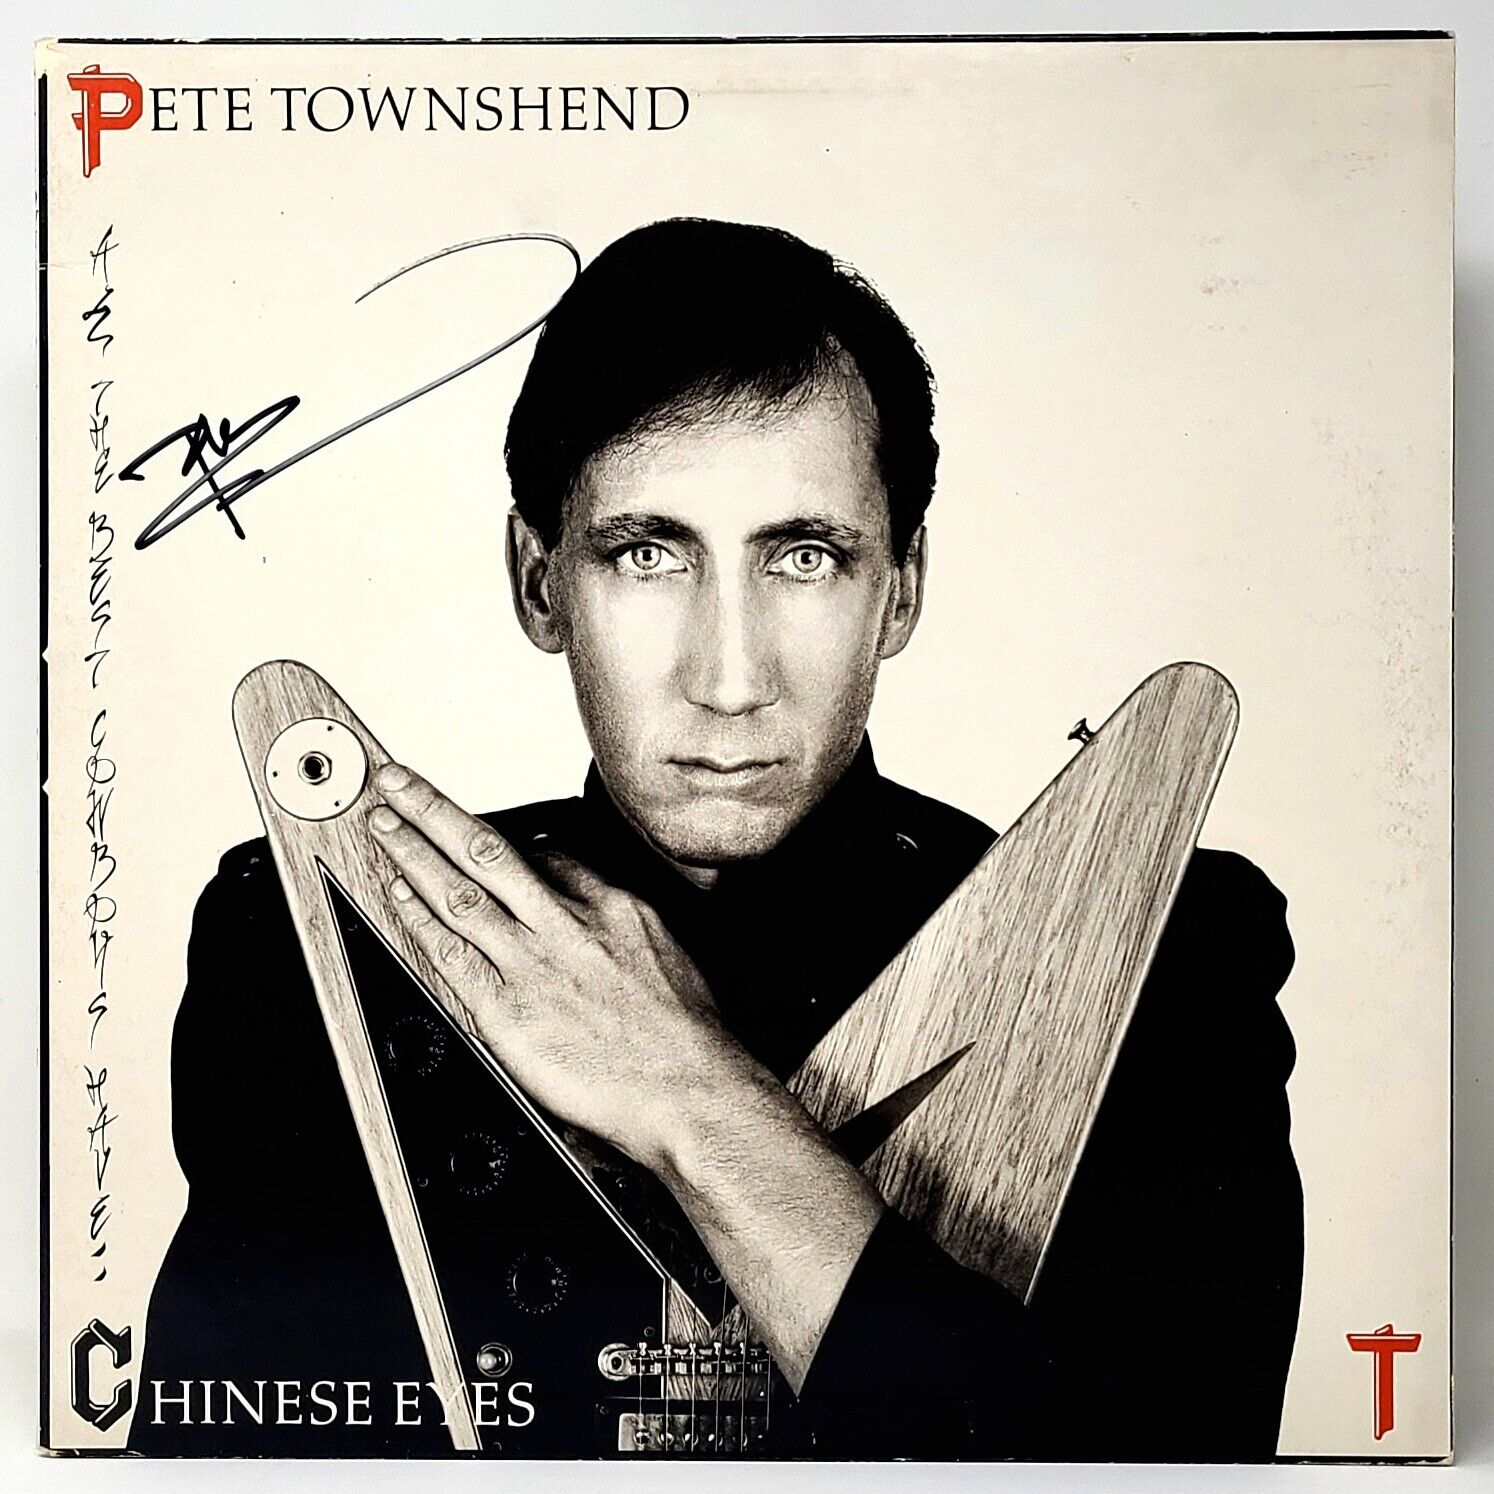 PETE TOWNSHEND Signed Autographed 